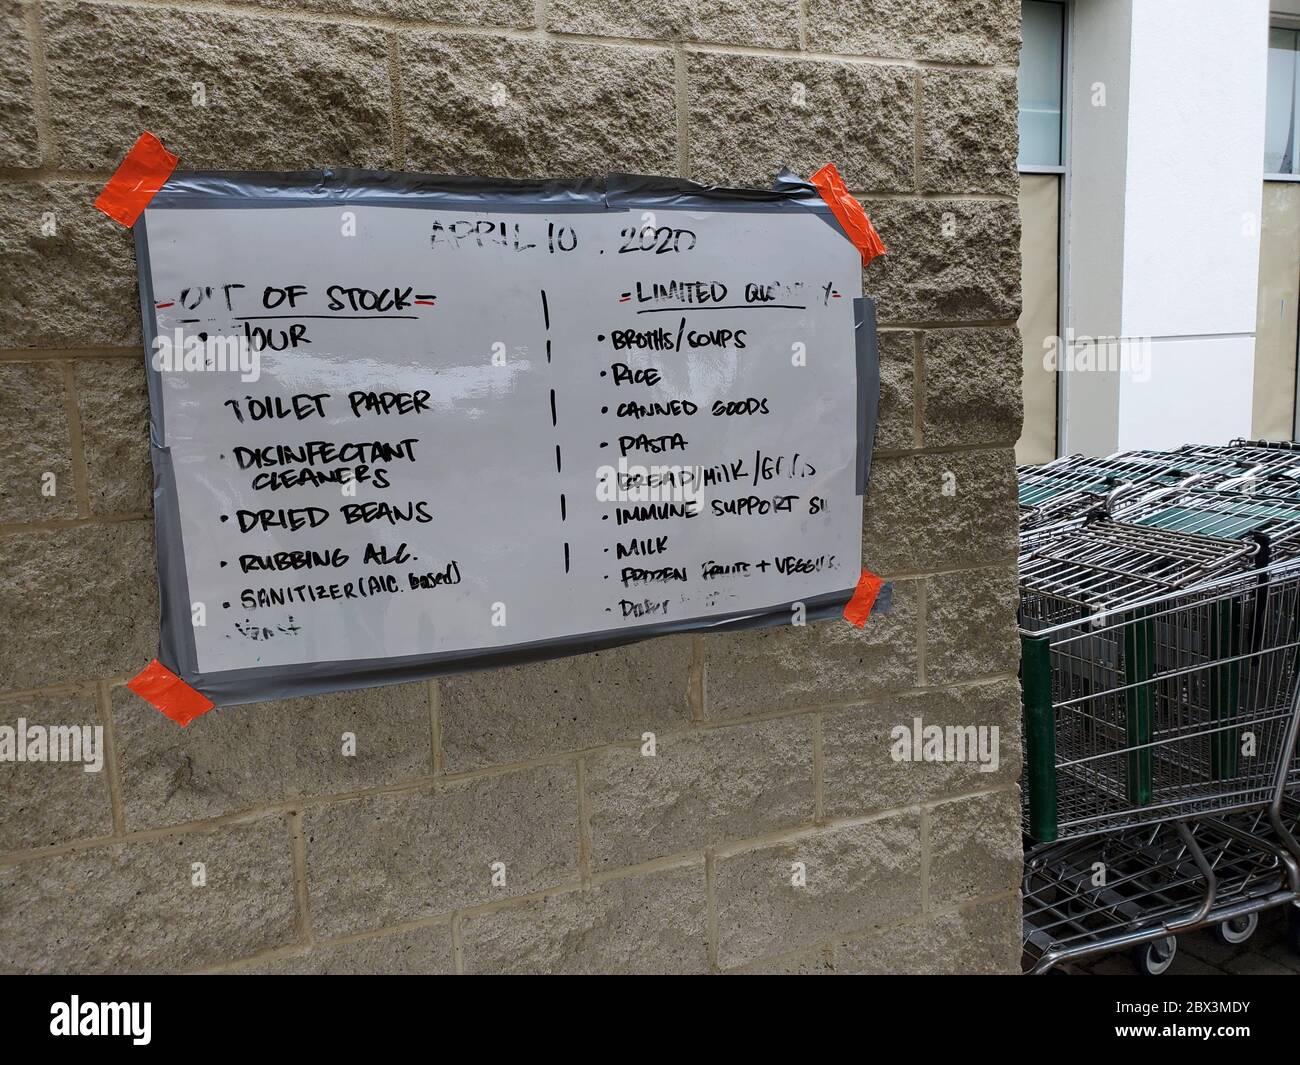 A whiteboard, updated daily, lists items which are sold out or have limited supply at a Whole Foods Market store in San Ramon, California during an outbreak of the COVID-19 coronavirus, April 12, 2020. () Stock Photo